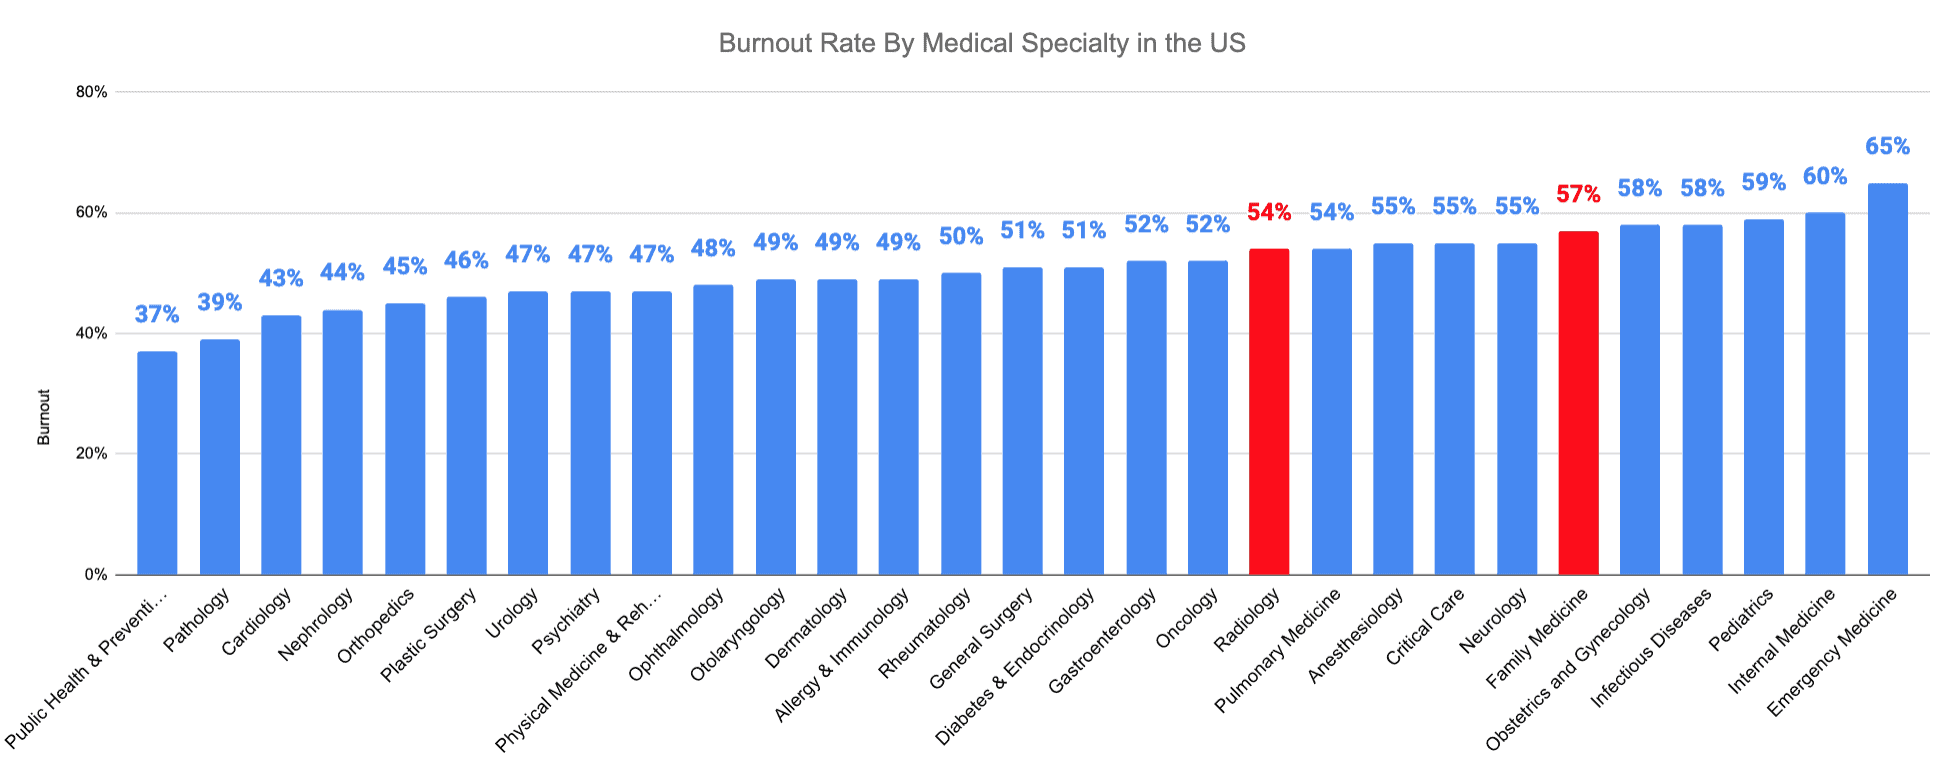 Radiology vs. Family Medicine Burnout Rate By Medical Specialty in the US